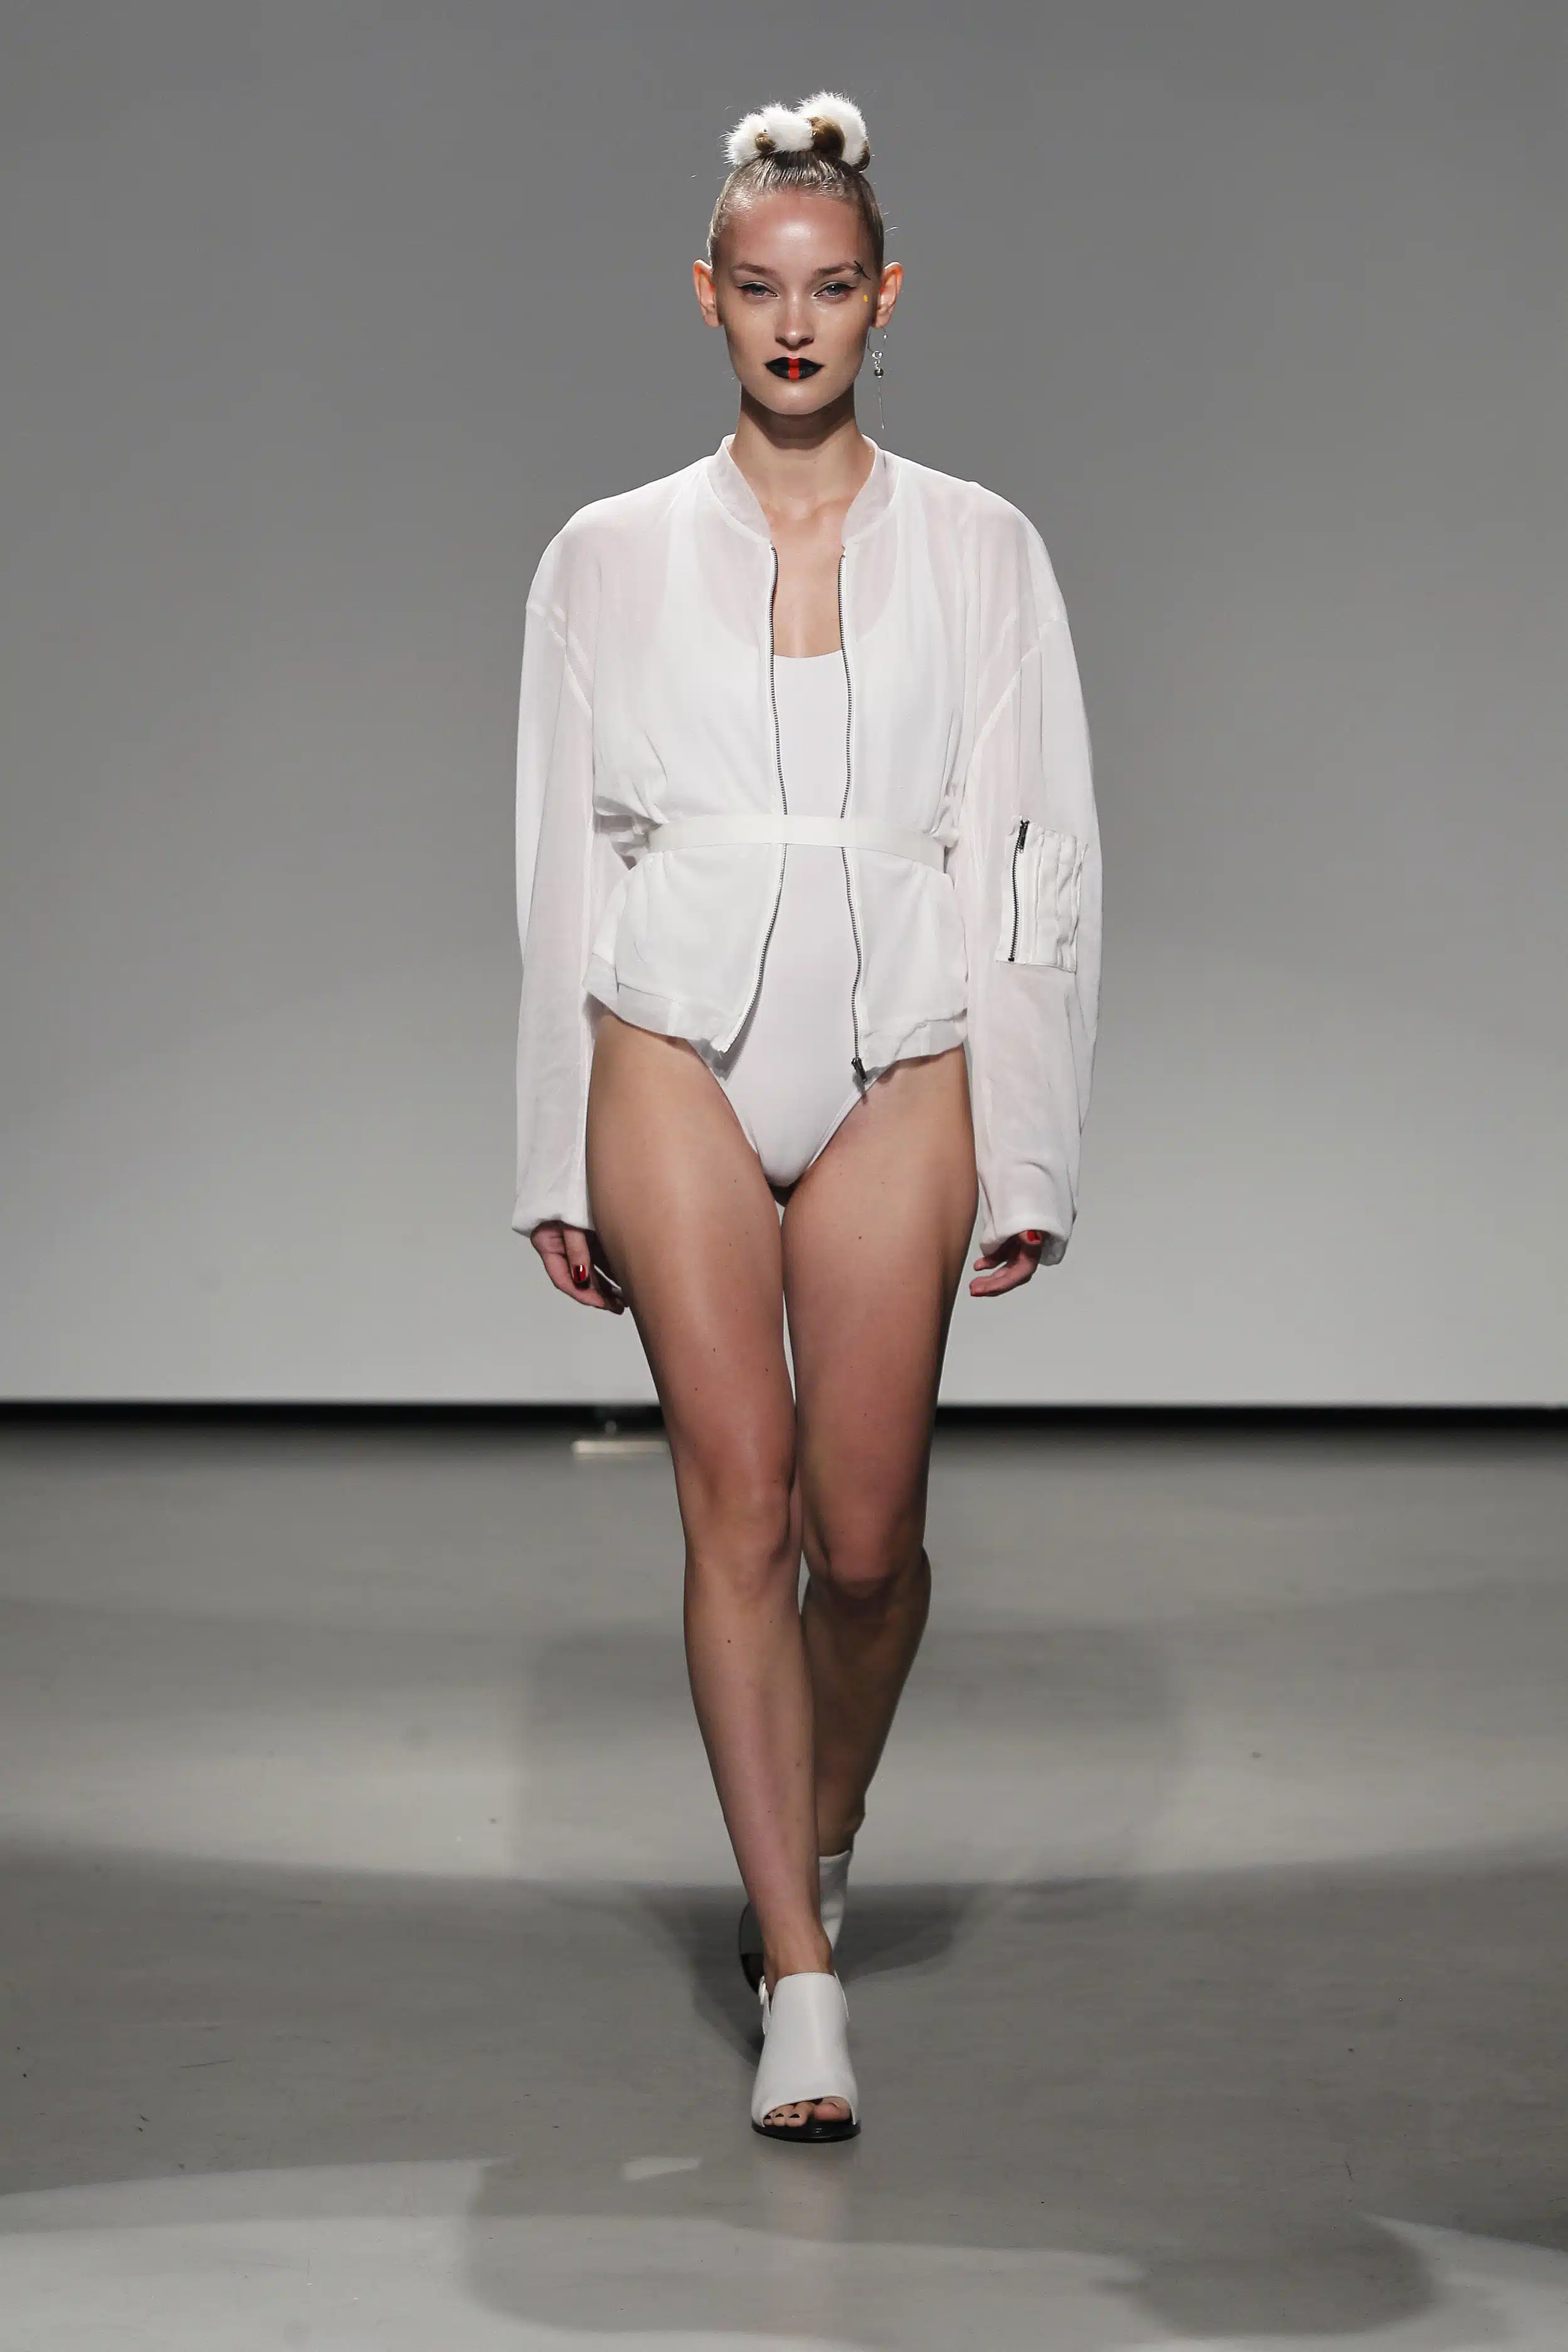 Image from SS16 SHOW Collection